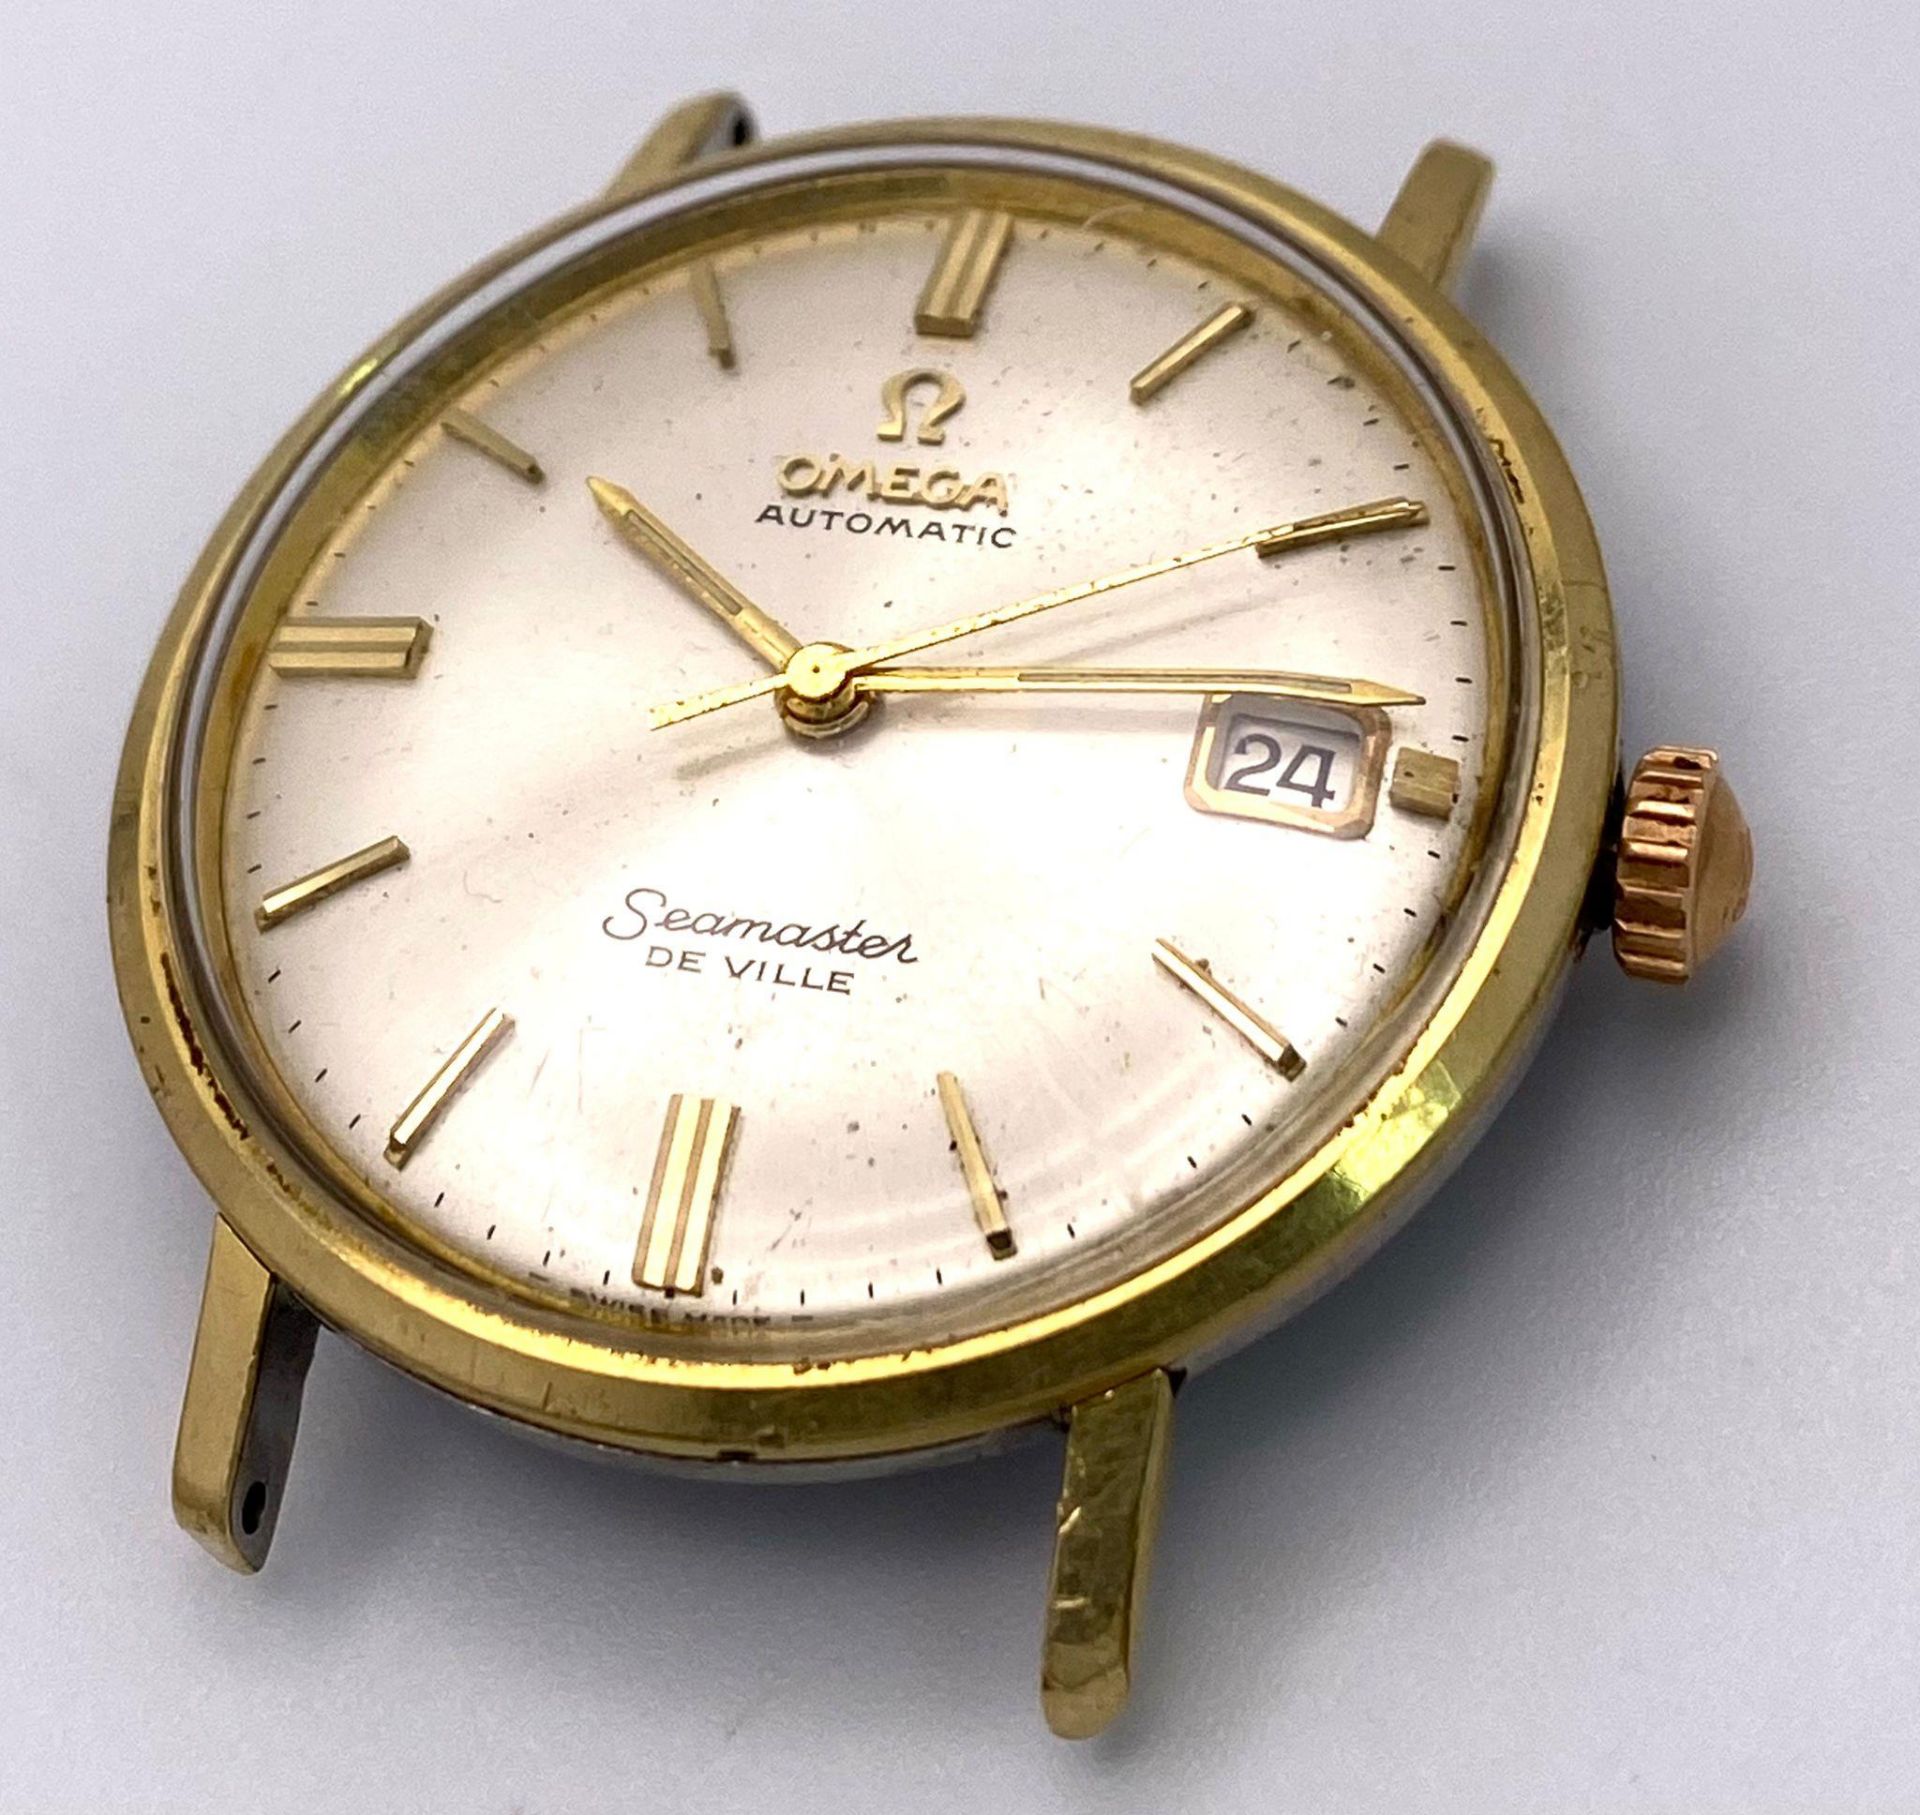 A vintage Omega Seamaster Automatic Watch Case. Case measures 33mm, water resistant and date. In